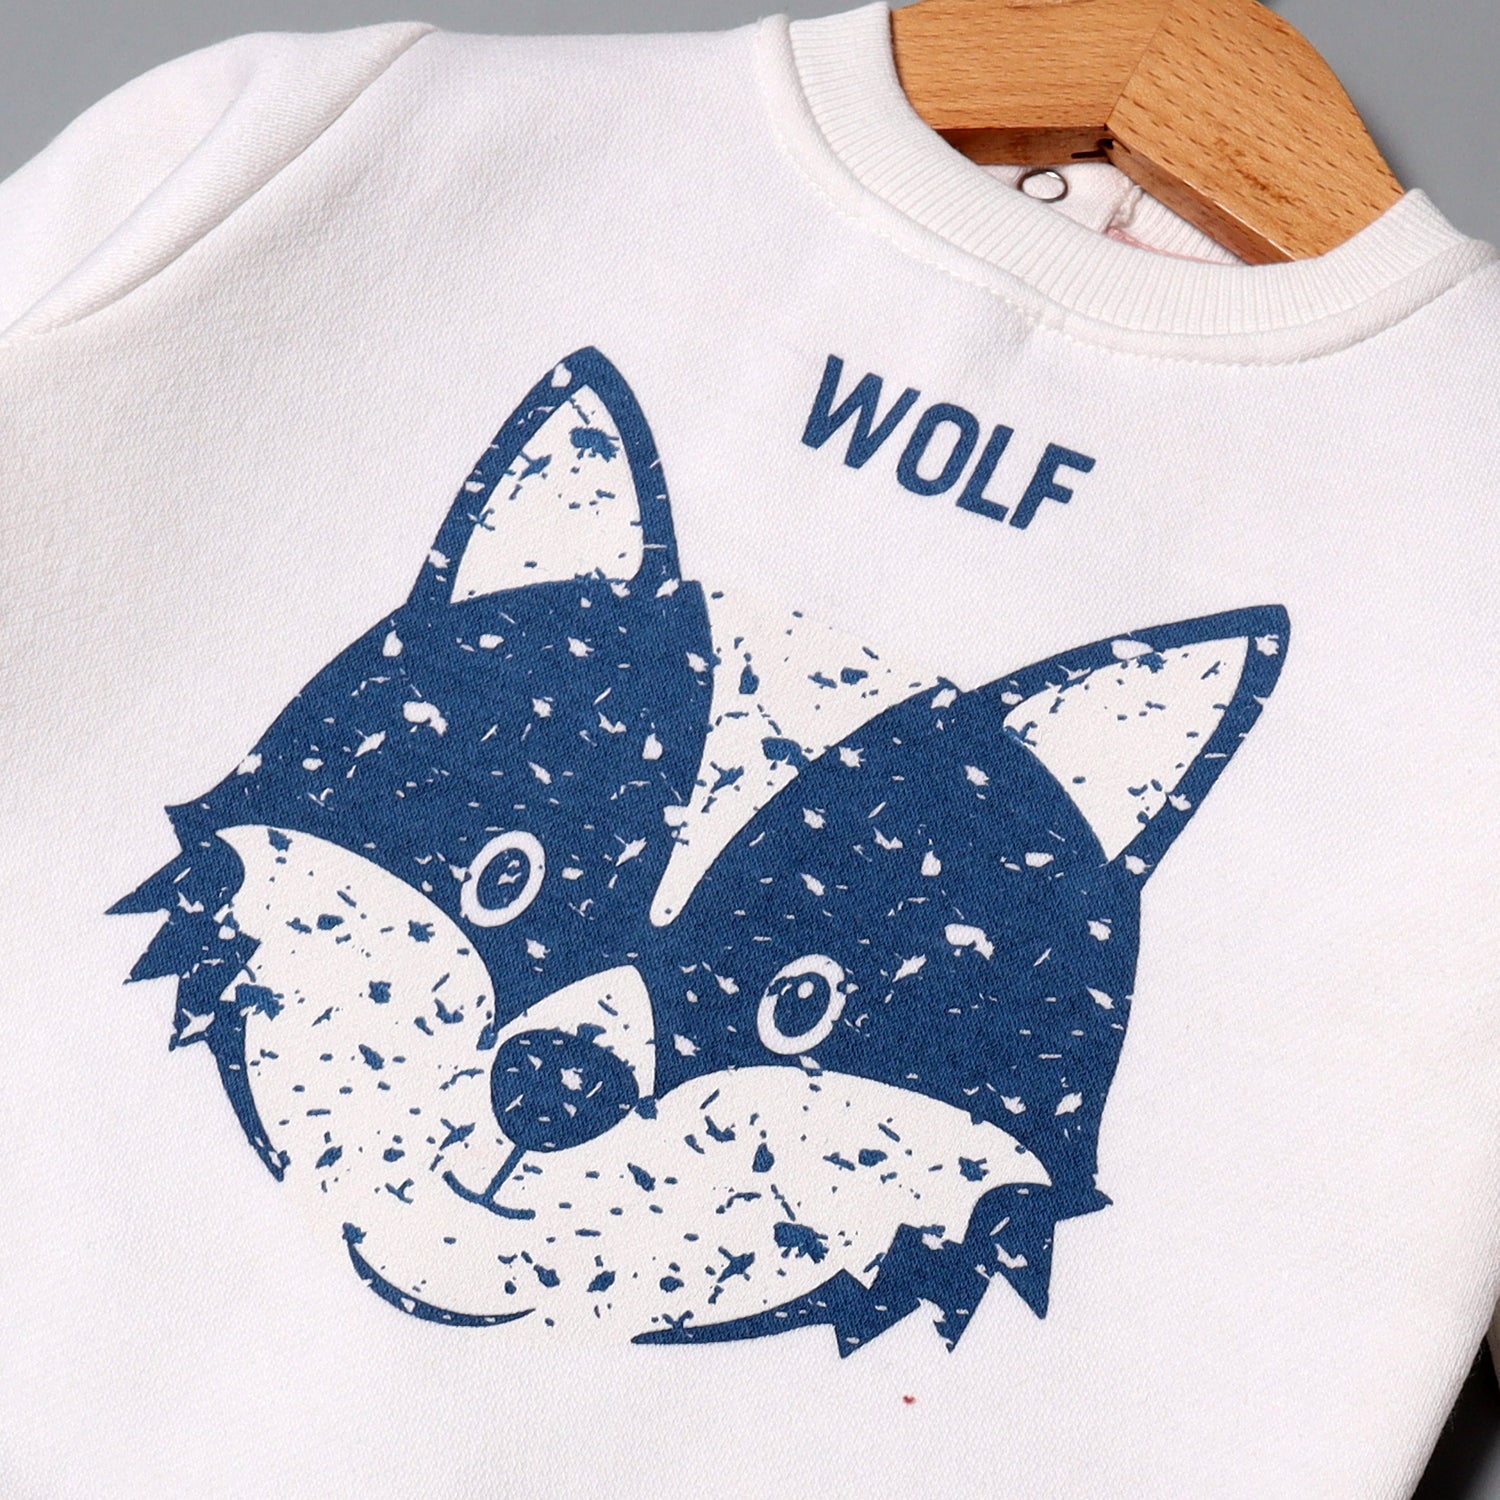 WHITE WOLF FACE PRINTED SWEATSHIRT FOR BOYS